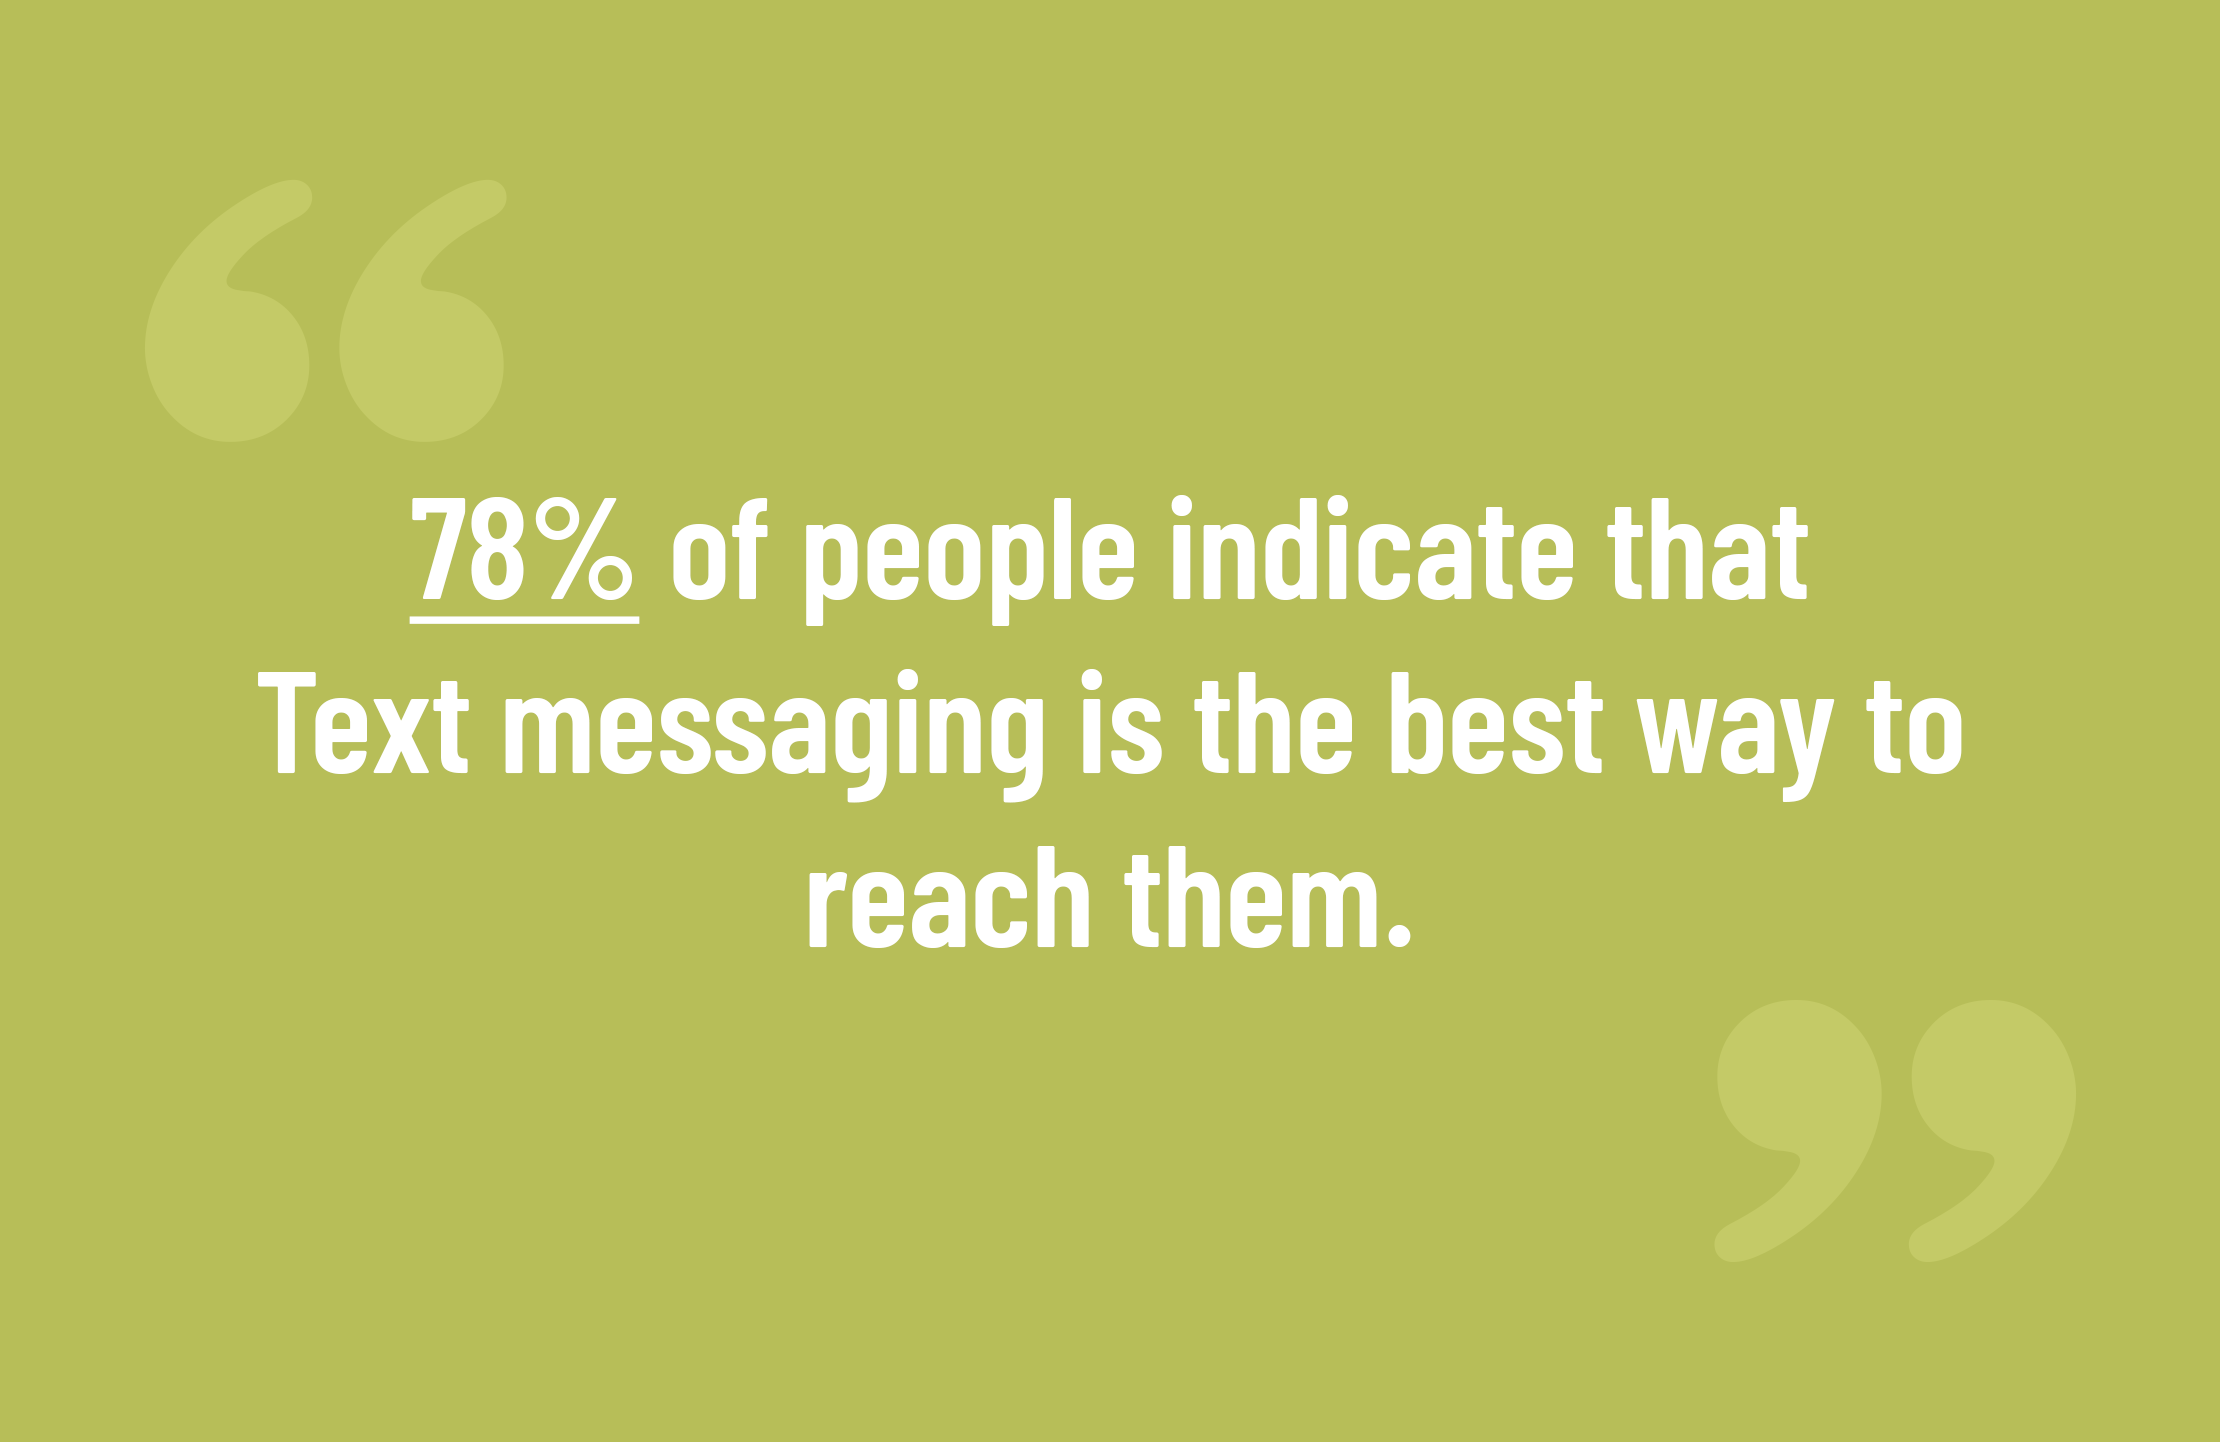 Top Ways To Succeed At Nonprofit SMS Marketing